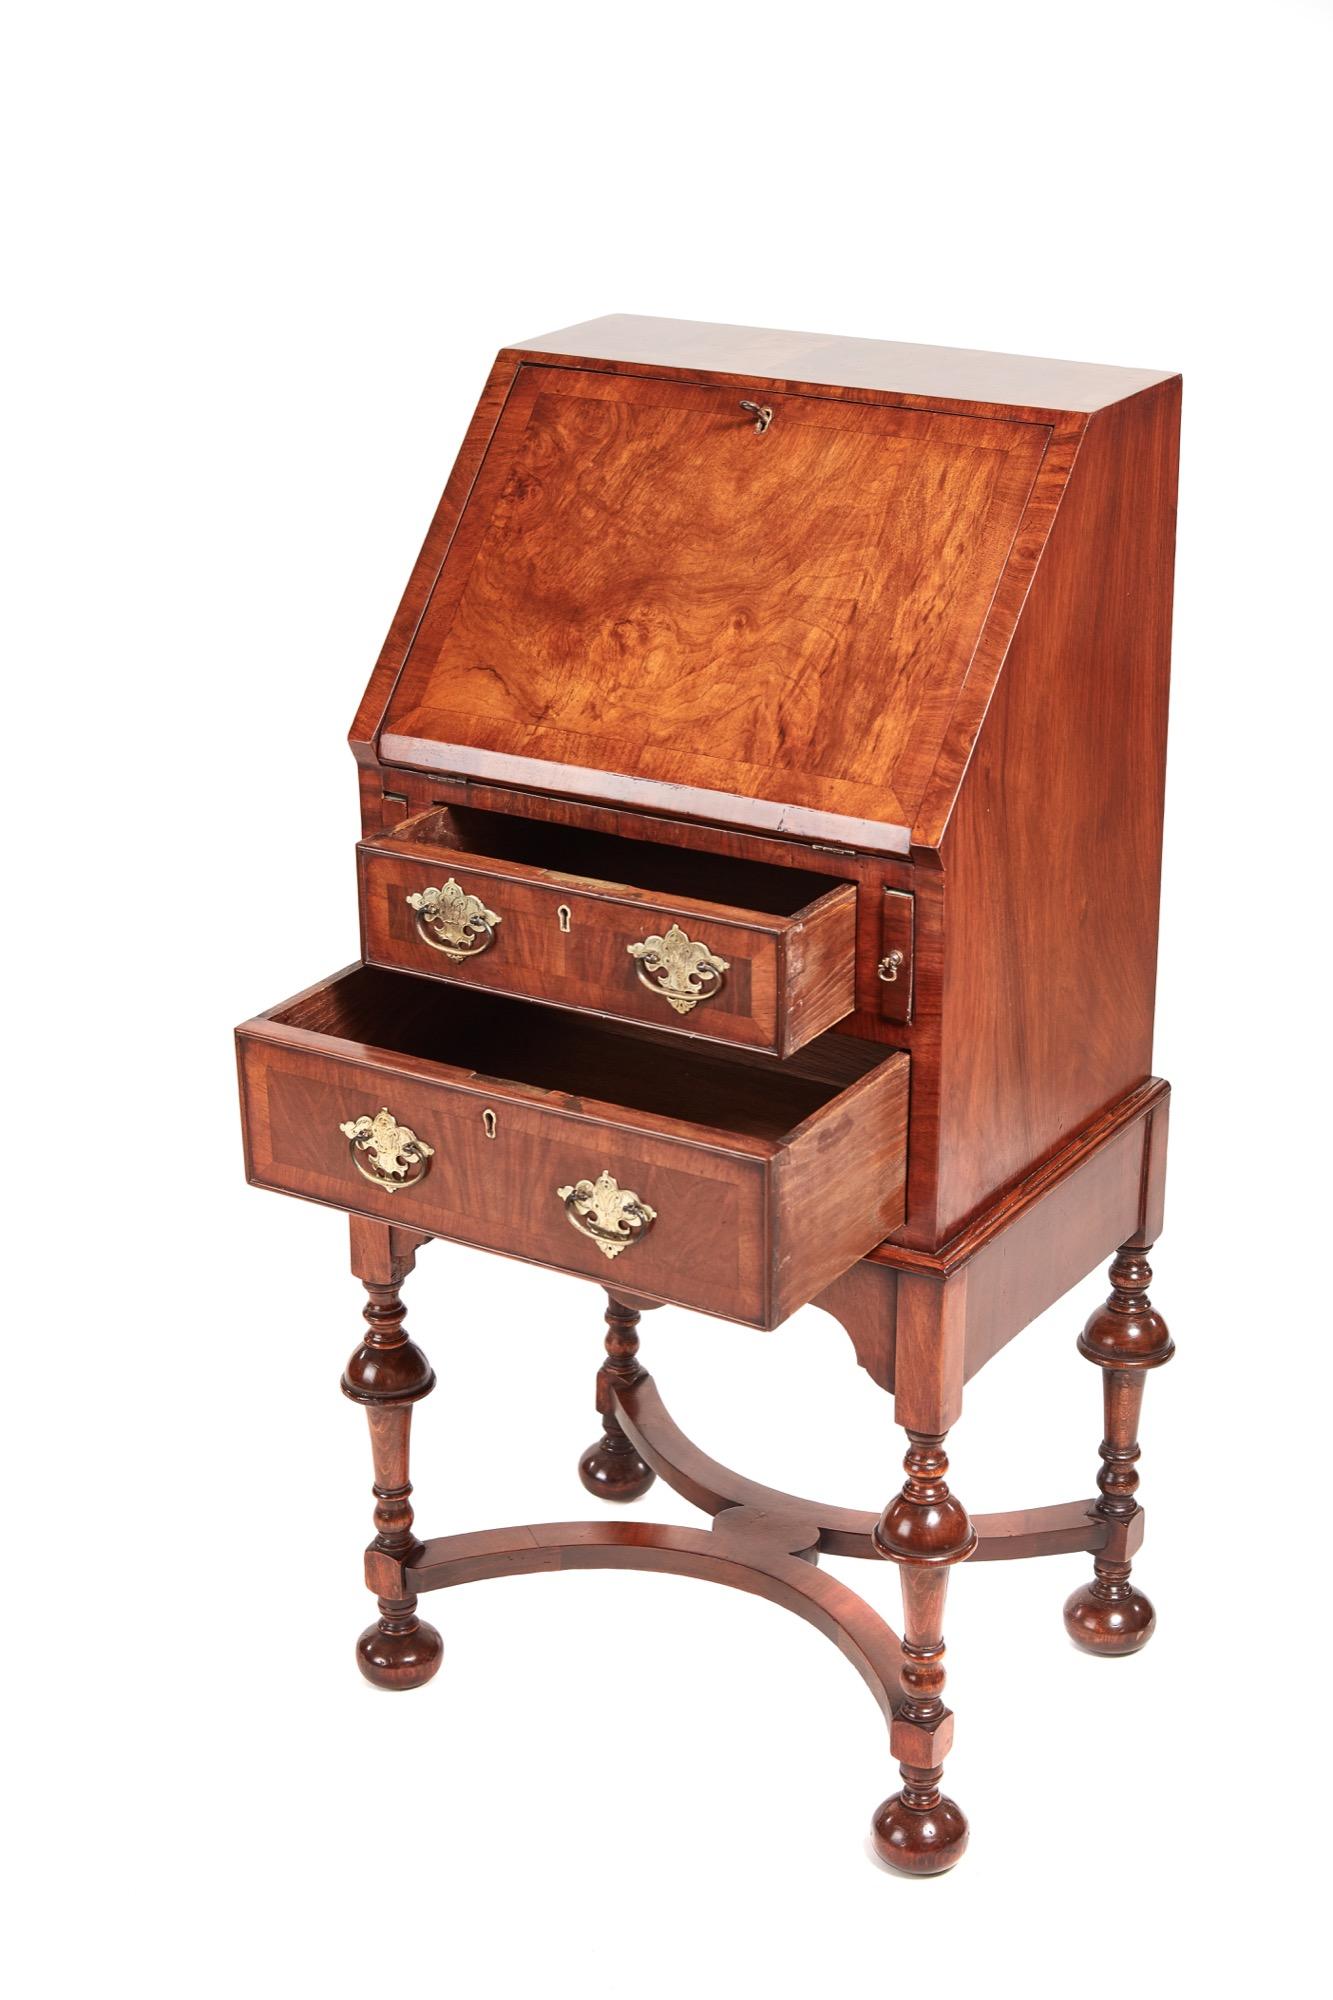 Outstanding antique William & Mary style figured walnut bureau. The fall and drawers all boast crossbanding on beautiful walnut veneers. The fall opens to reveal two drawers and pigeon holes and two front drawers with original brass handles. It